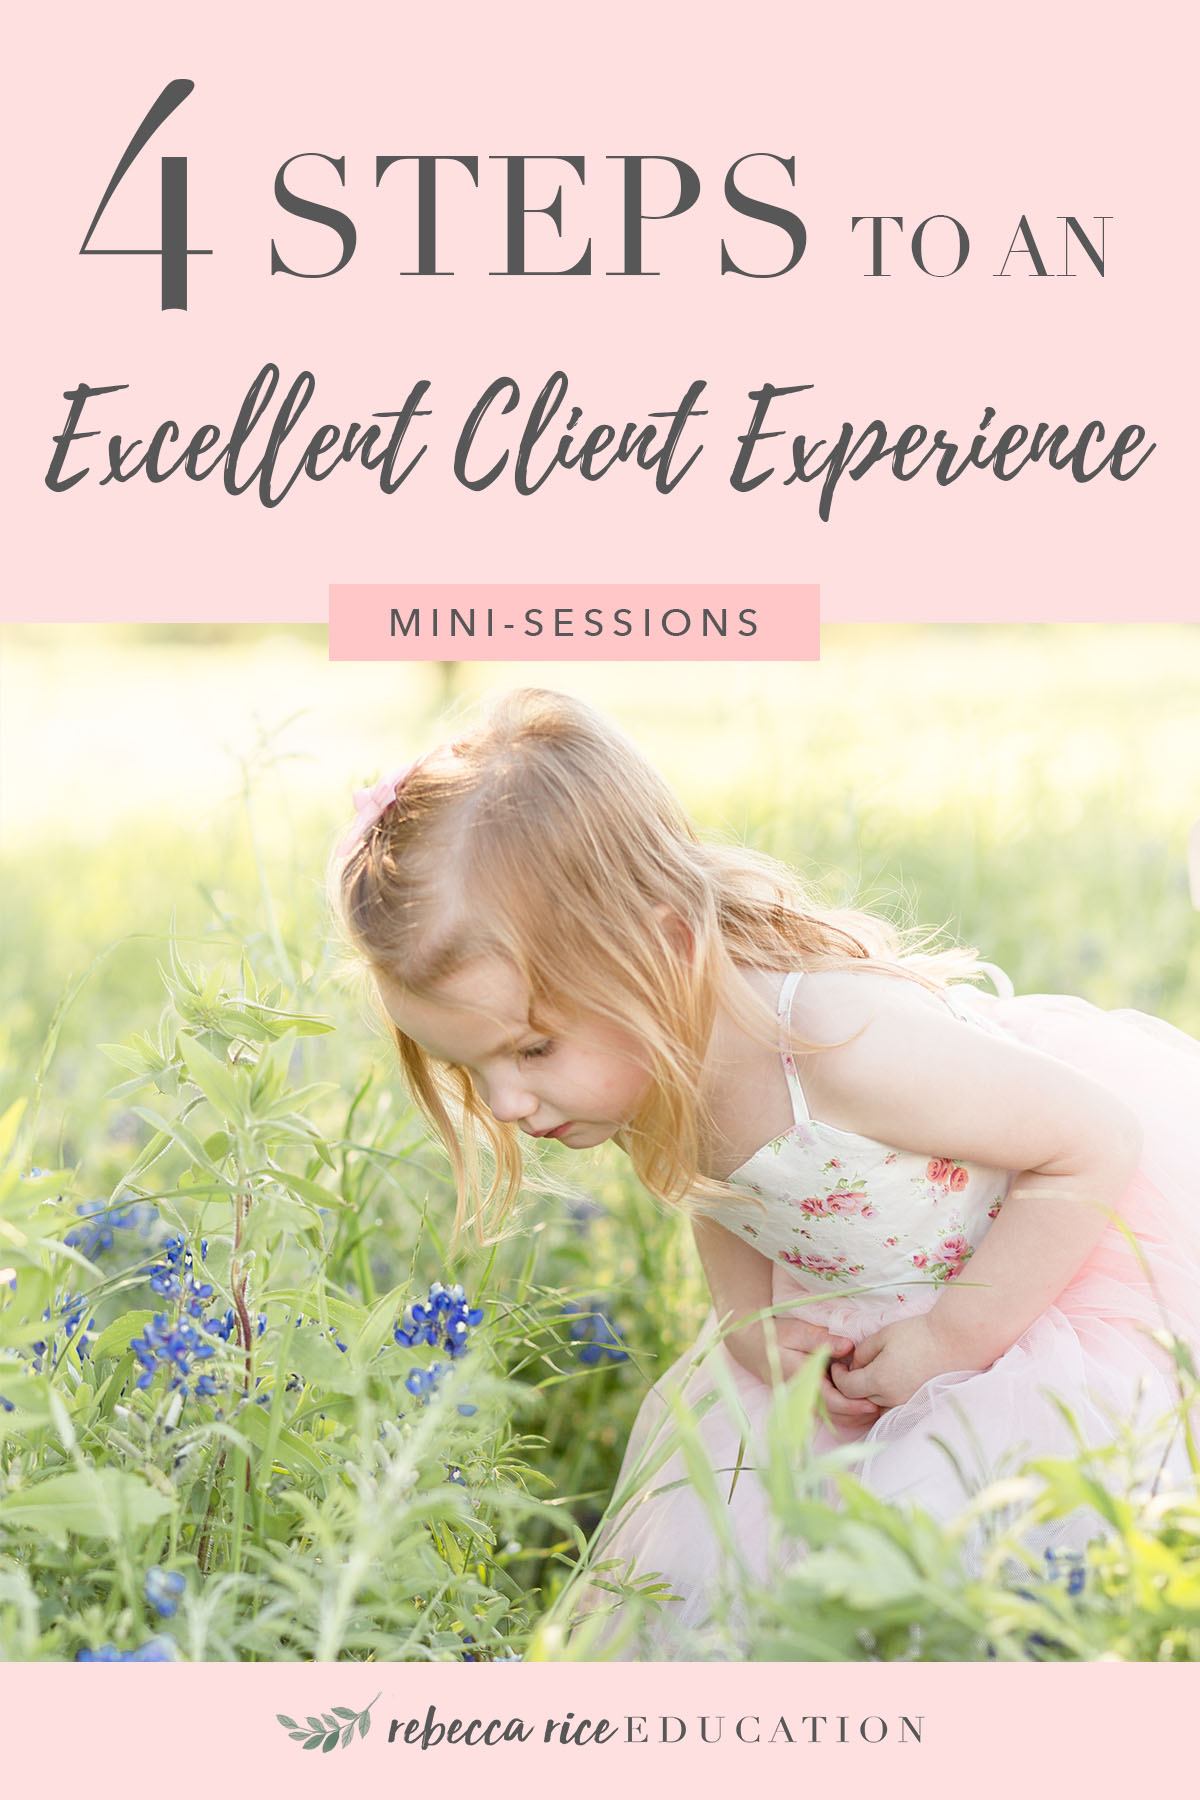 4 steps to an excellent client experience mini-sessions minis rebecca rice education